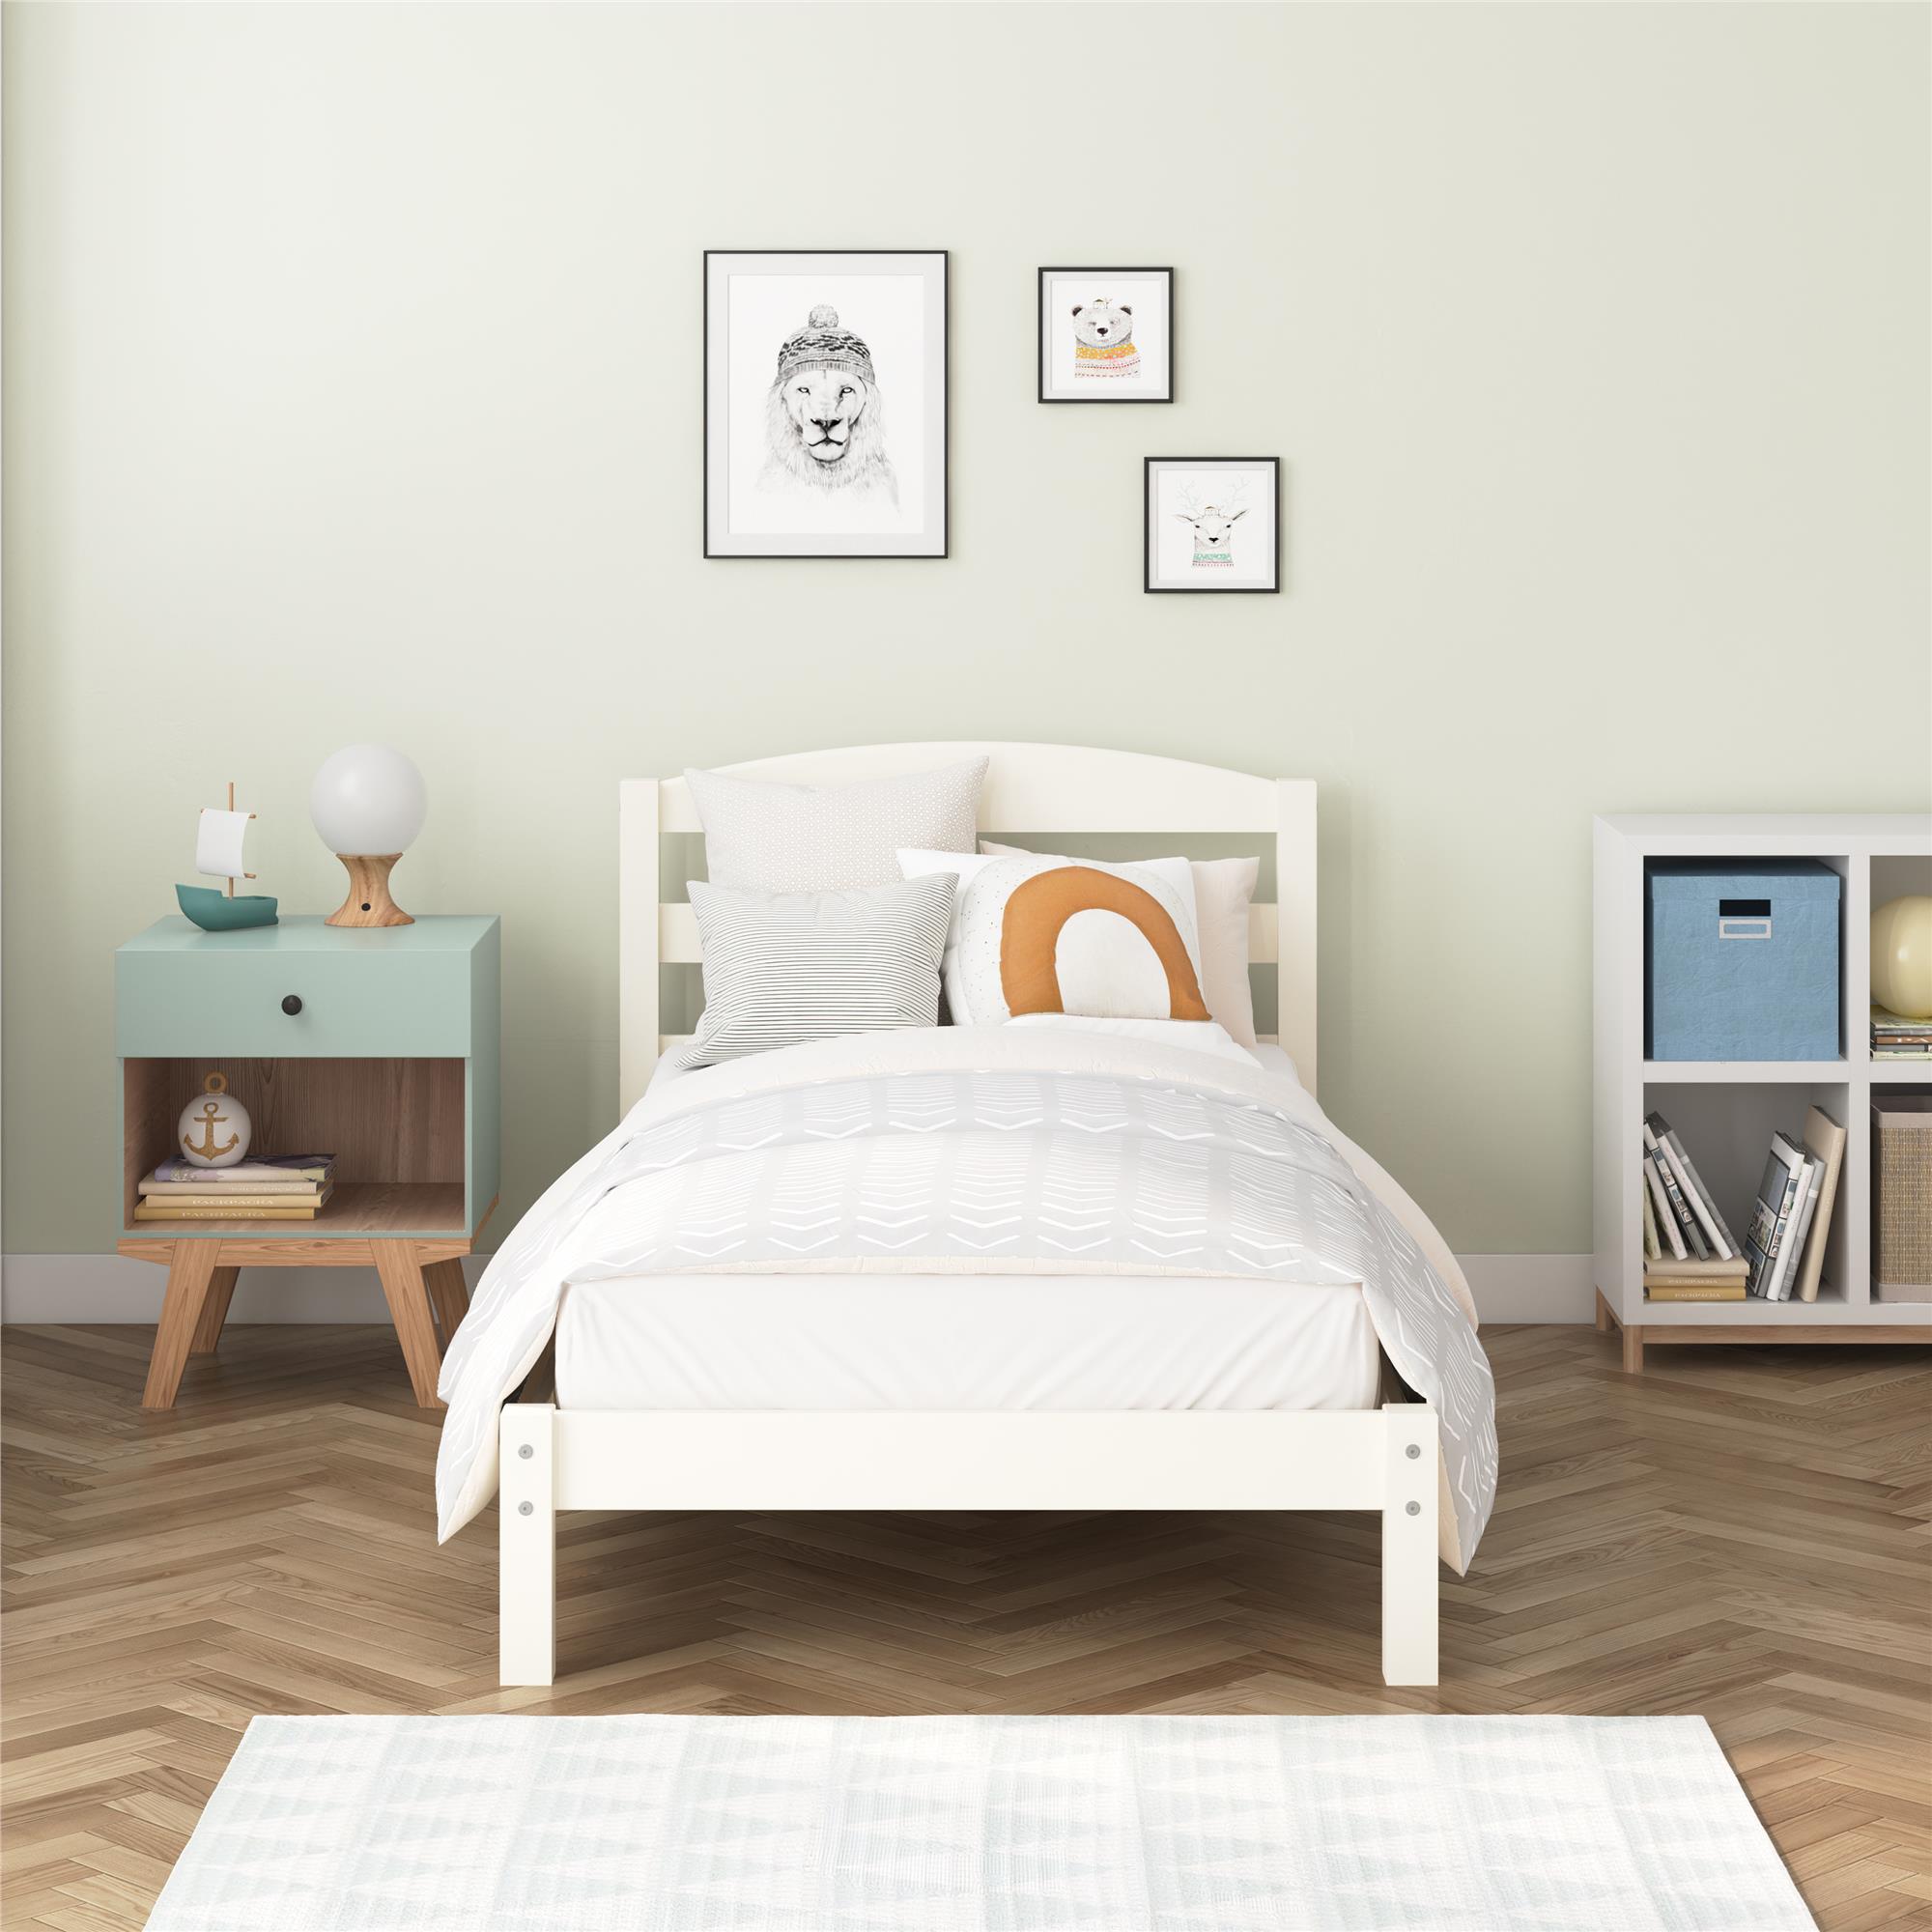 Better Homes & Gardens Leighton Kids Twin Size Bed, Wood Platform Bed Frame, Off-White - image 2 of 10